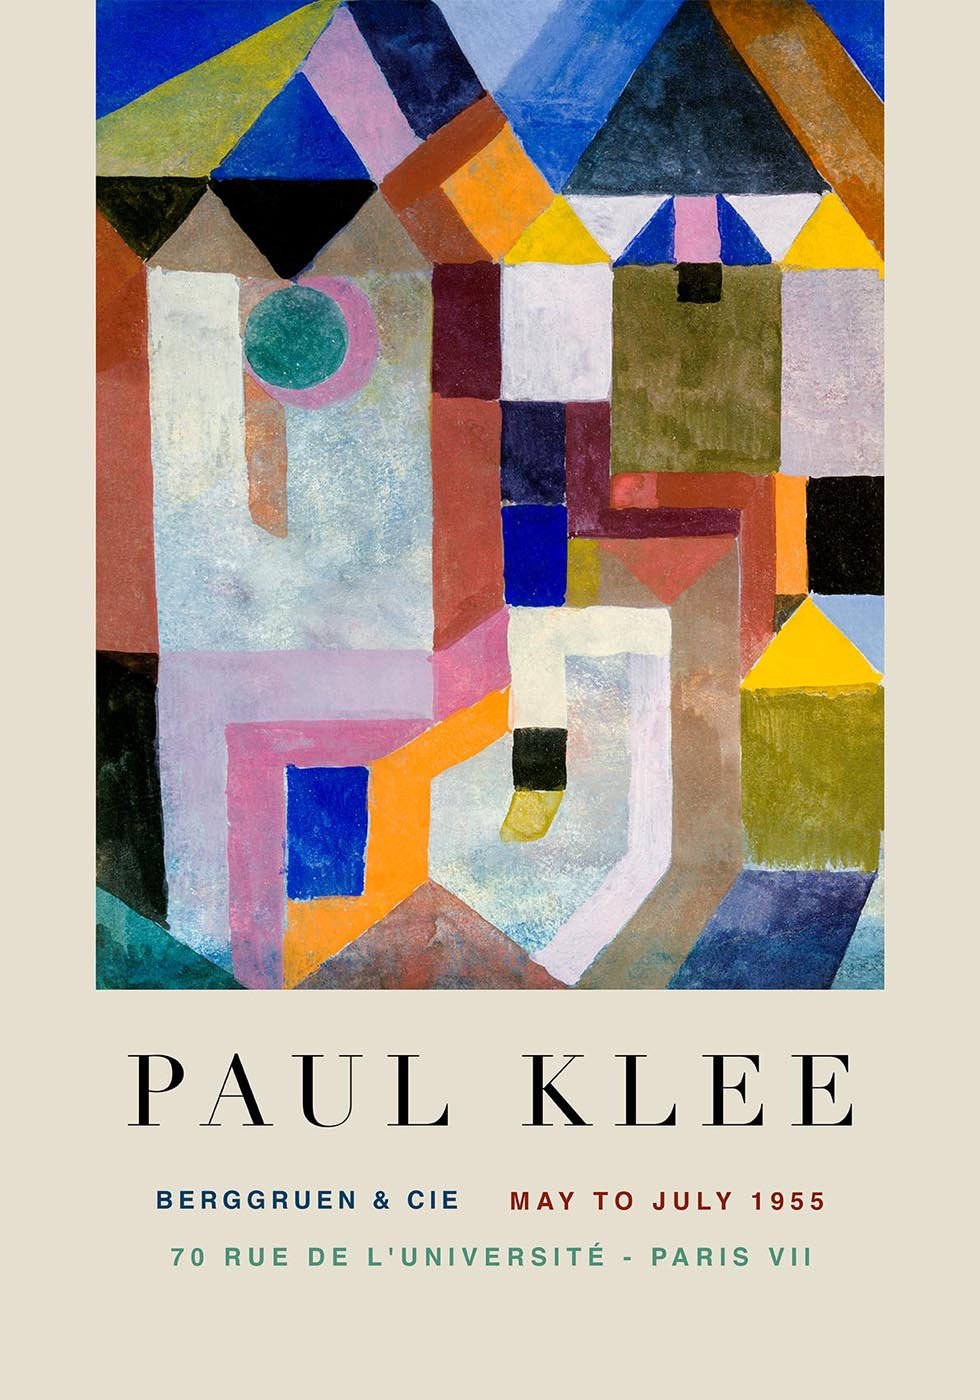 Paul Klee Colorful Architecture Art Exhibition Poster